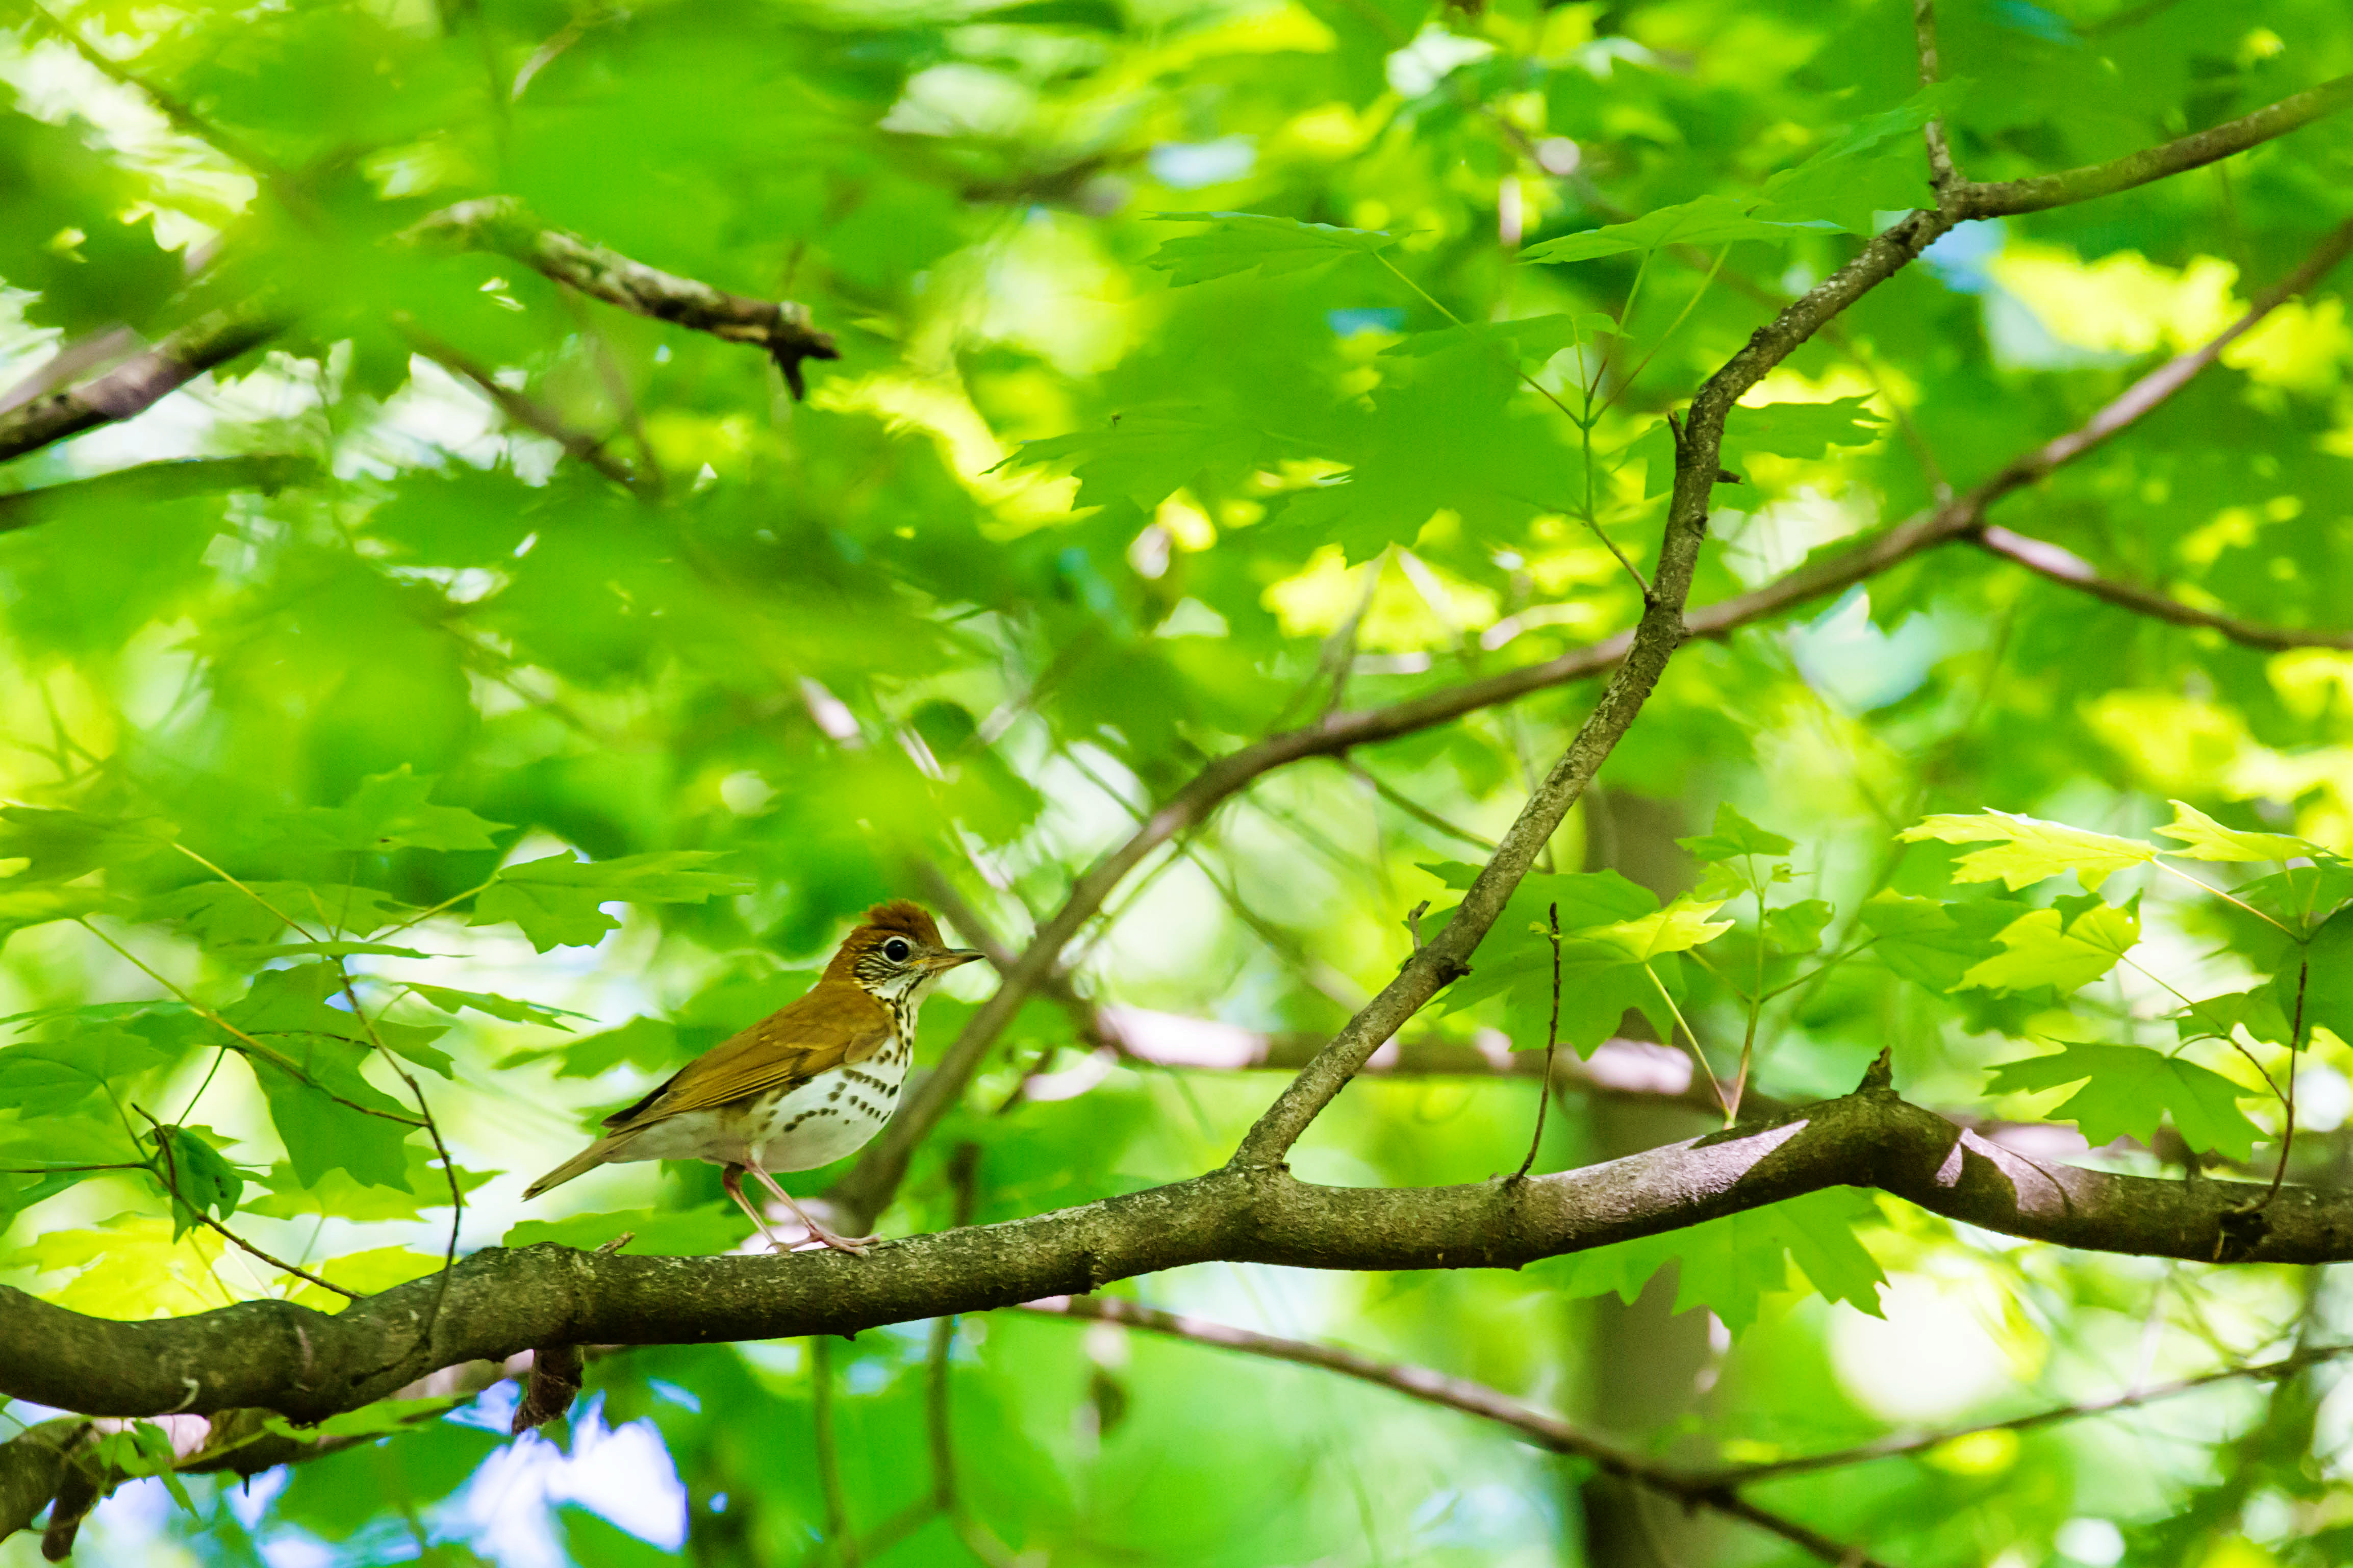 Wood thrush sitting on a branch high in a tree with green leaves behind it